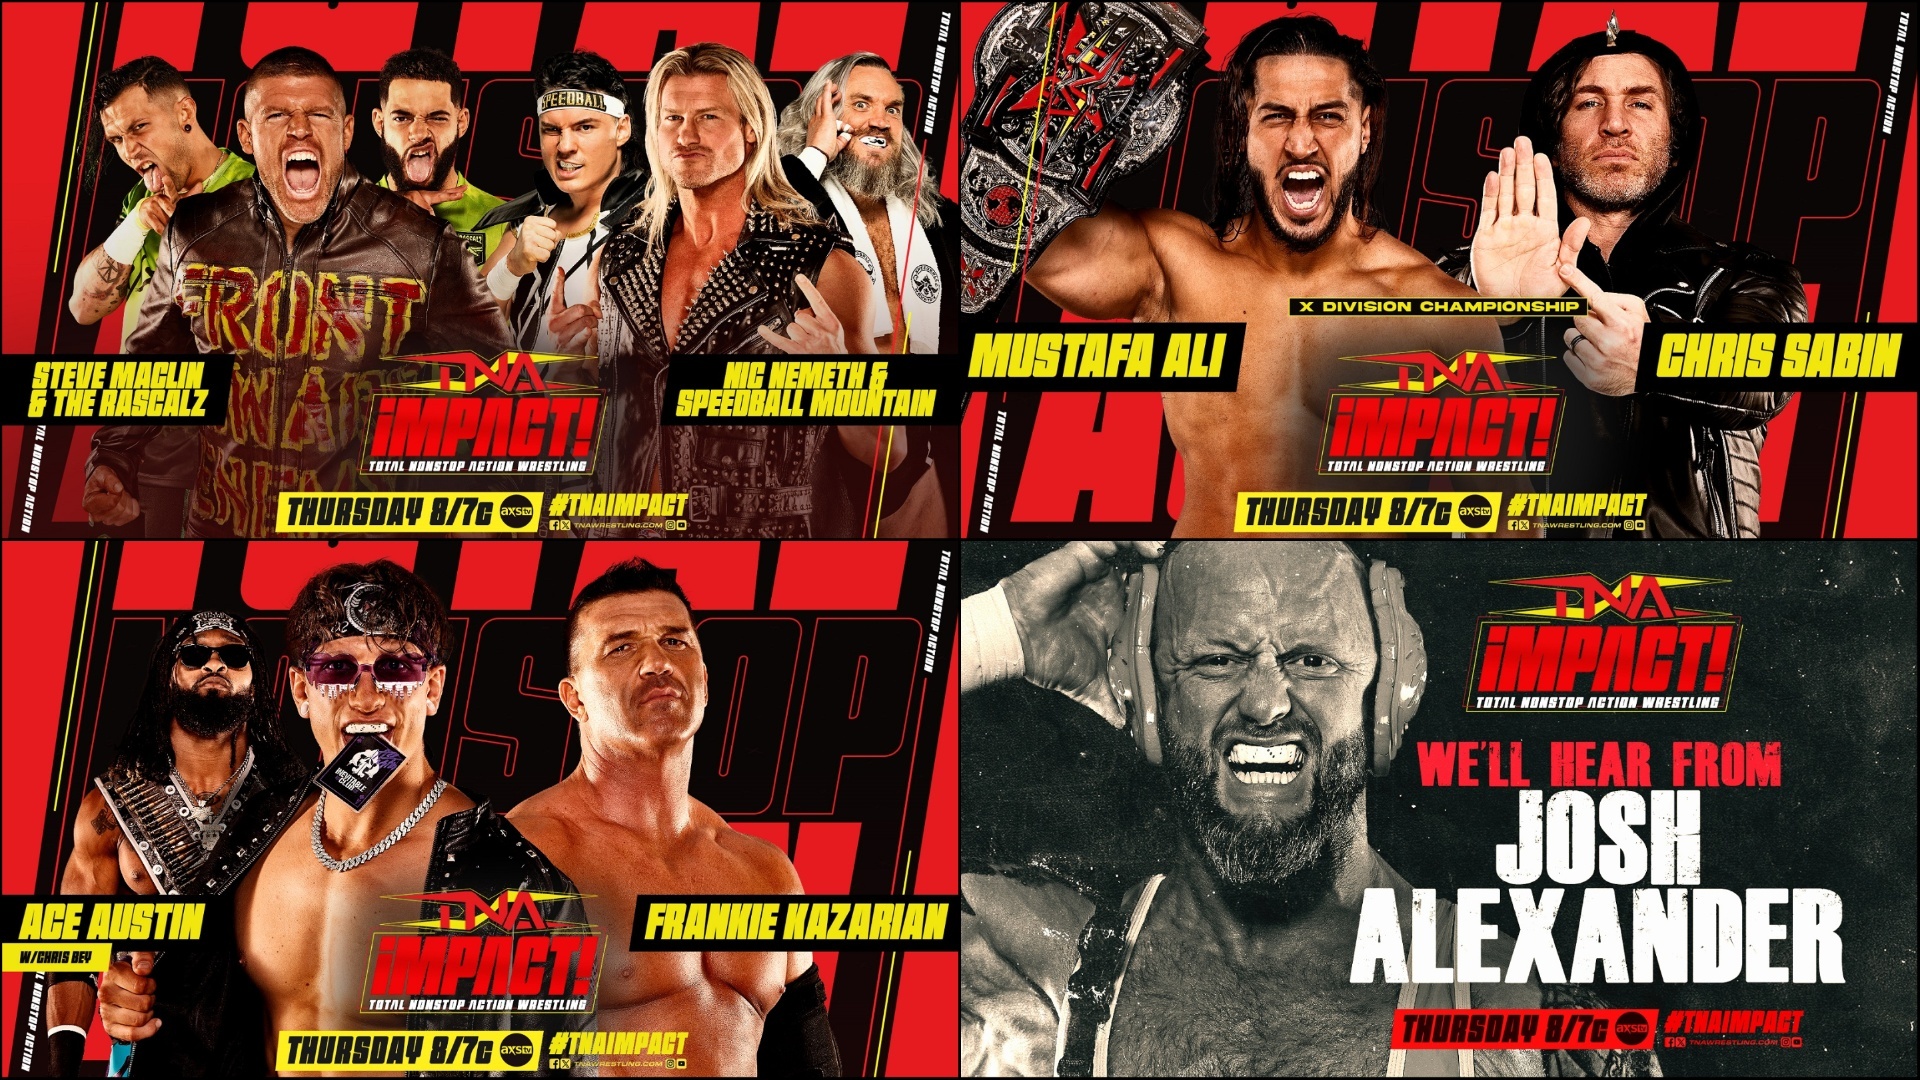 TNA Wrestling - Opening Day is premiering NOW on Twitch!... | Facebook